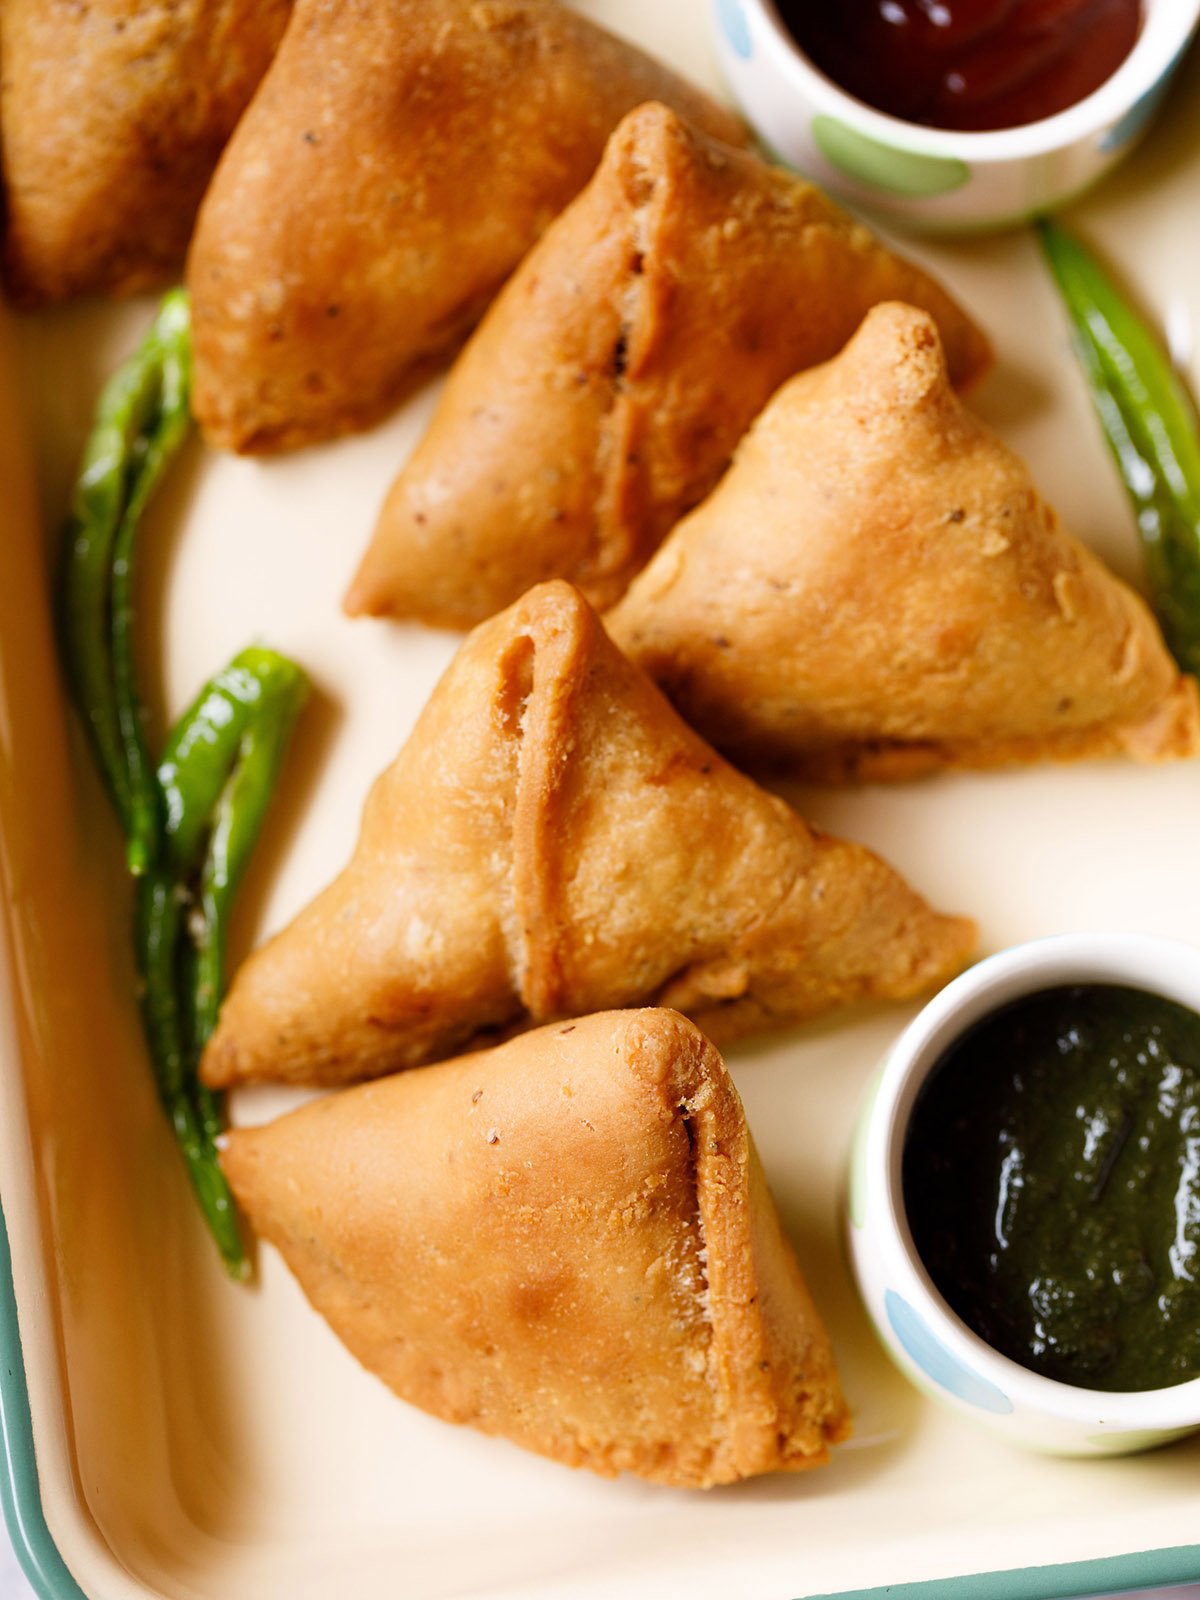 samosa kept in a tray with a bowl of green chutney and some salted fried green chillies